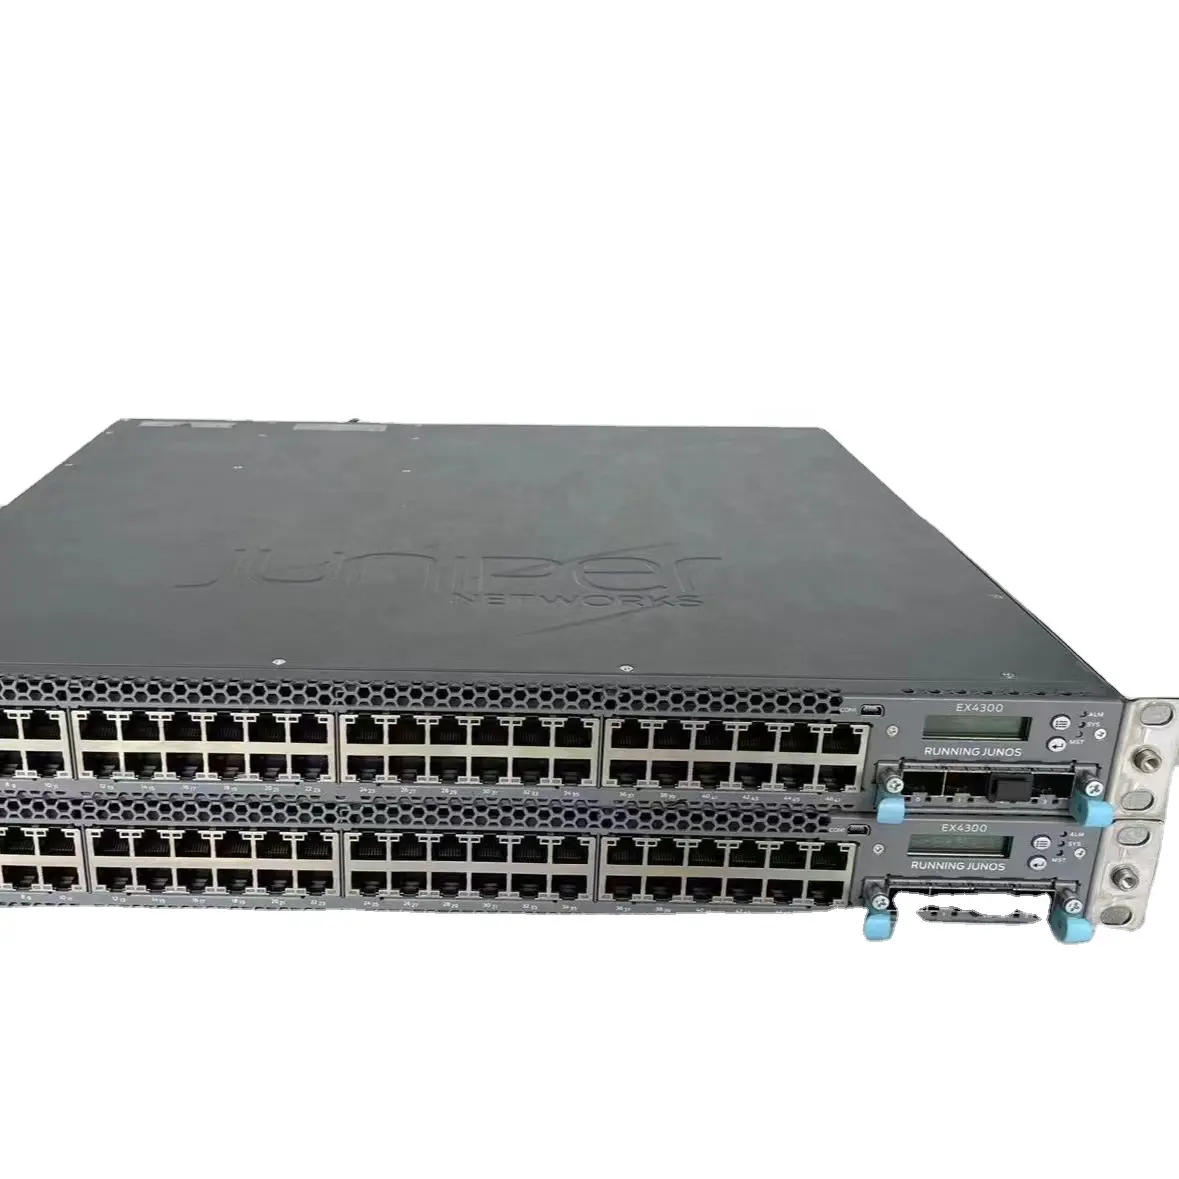 Juniper Networks EX3400-48T-DC 48-port Ethernet Switch with 4 SFP+, 2 QSFP+ Uplink Ports and DC Power Supply